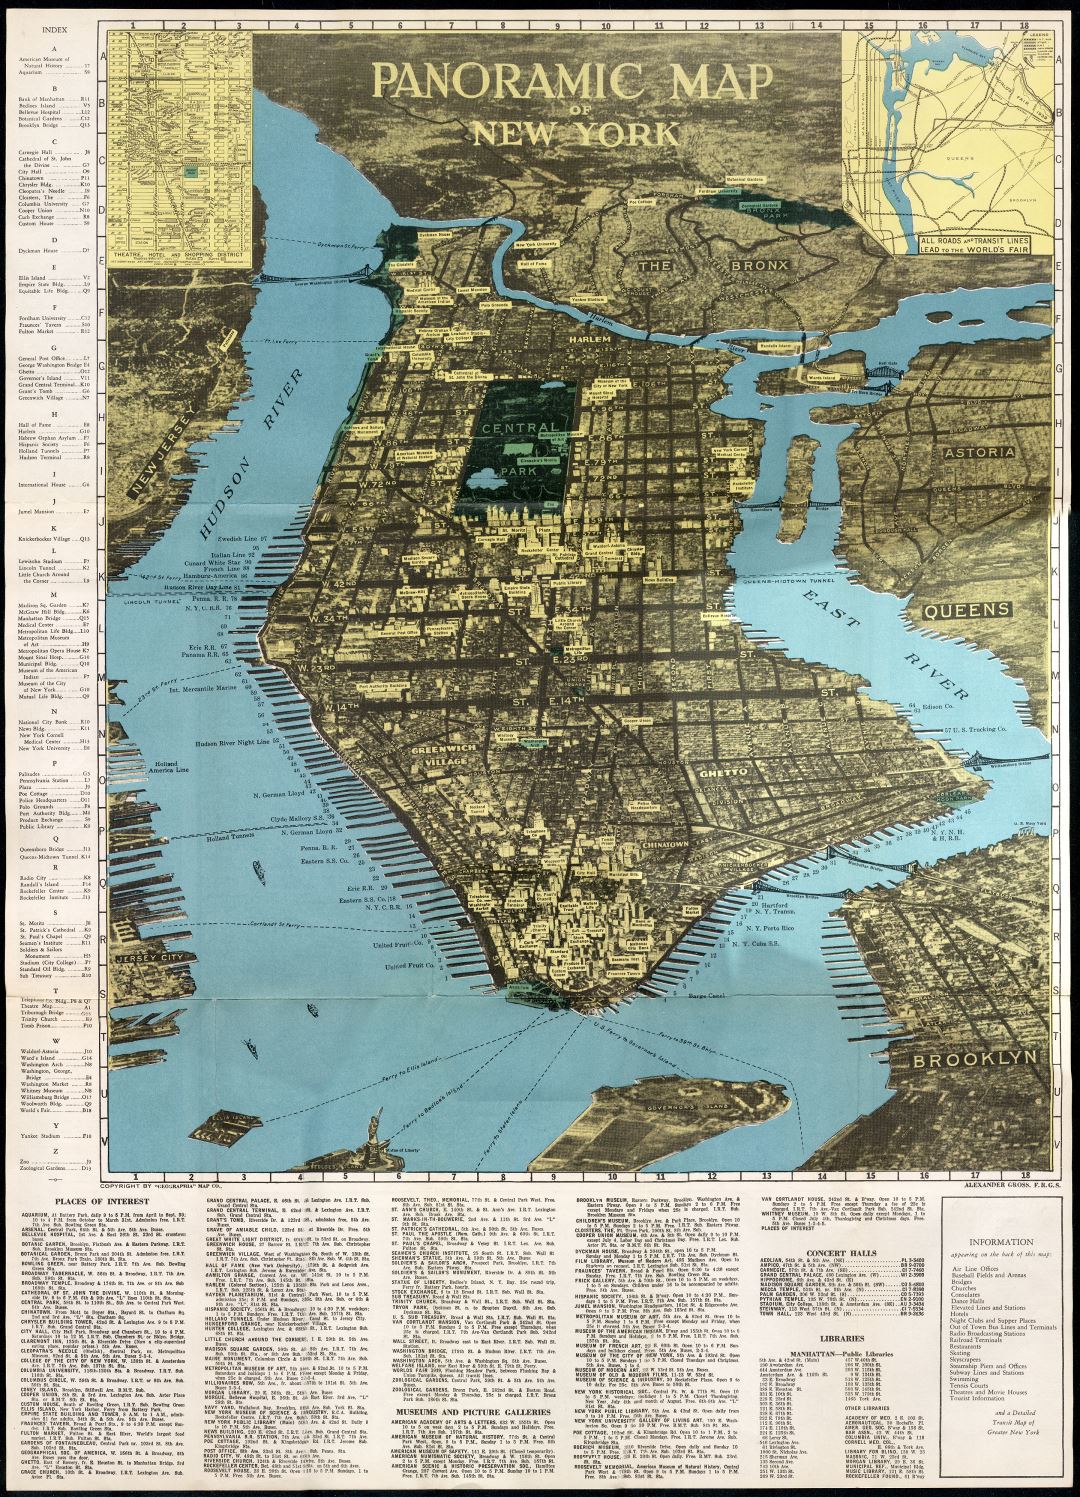 Large scale panoramic map of New York (NYC)